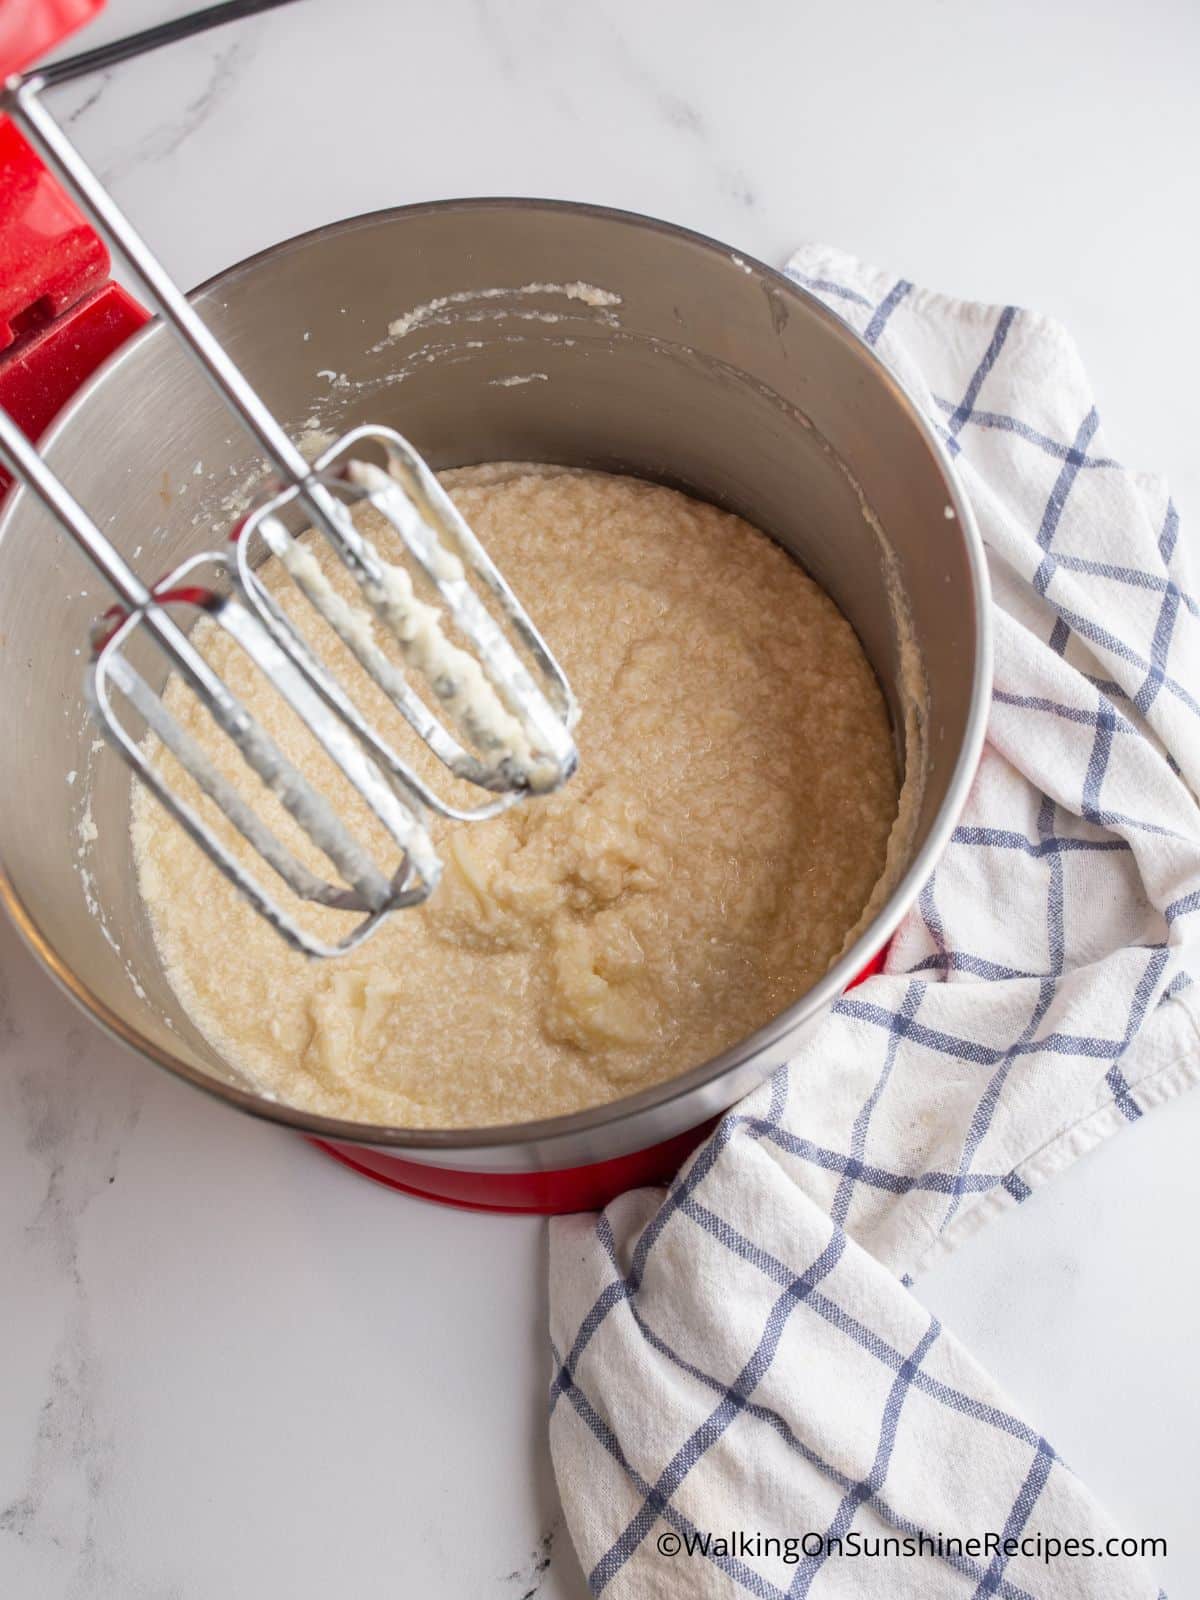 Add ricotta cheese to cookie batter.